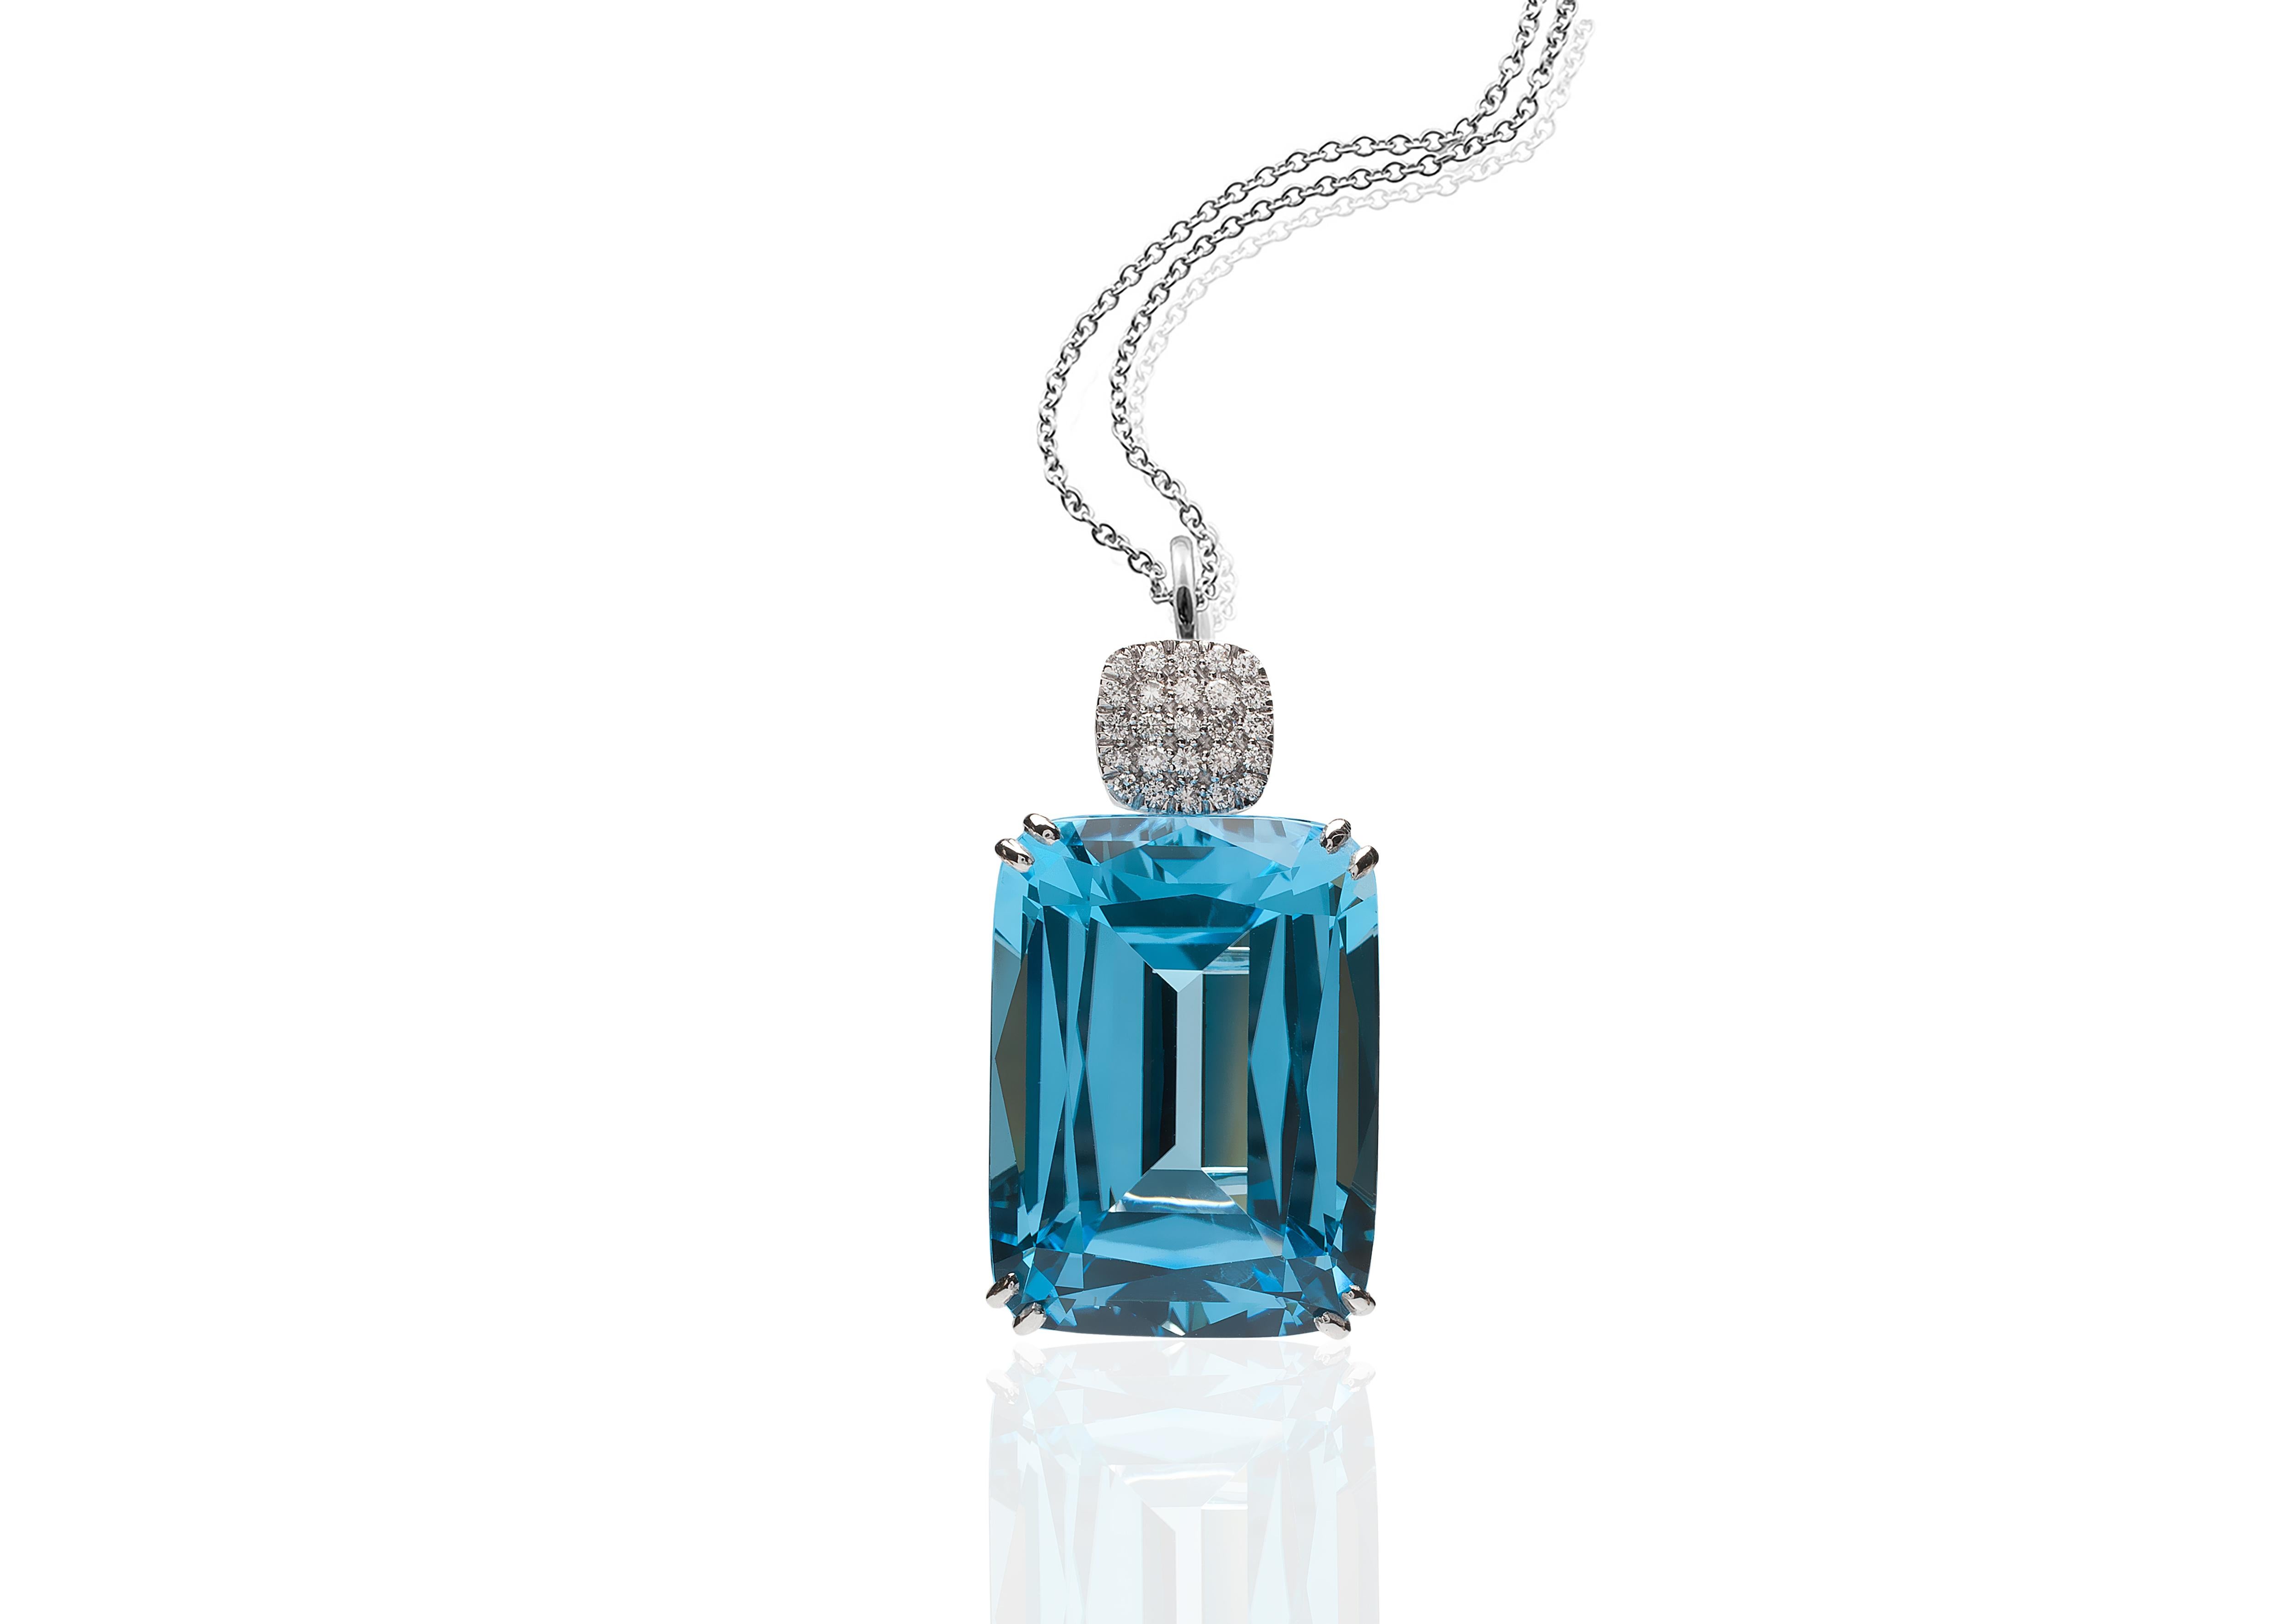 Blue Topaz Cushion Pendant in 18K White Gold with Diamonds on an 18'' Chain from 'Gossip' Collection

 Stone Size: 15 x 20 mm

Gemstone Approx Wt: Blue Topaz- 28.23 Carats

 Diamonds: G-H / VS, Approx Wt: 0.18 Carats